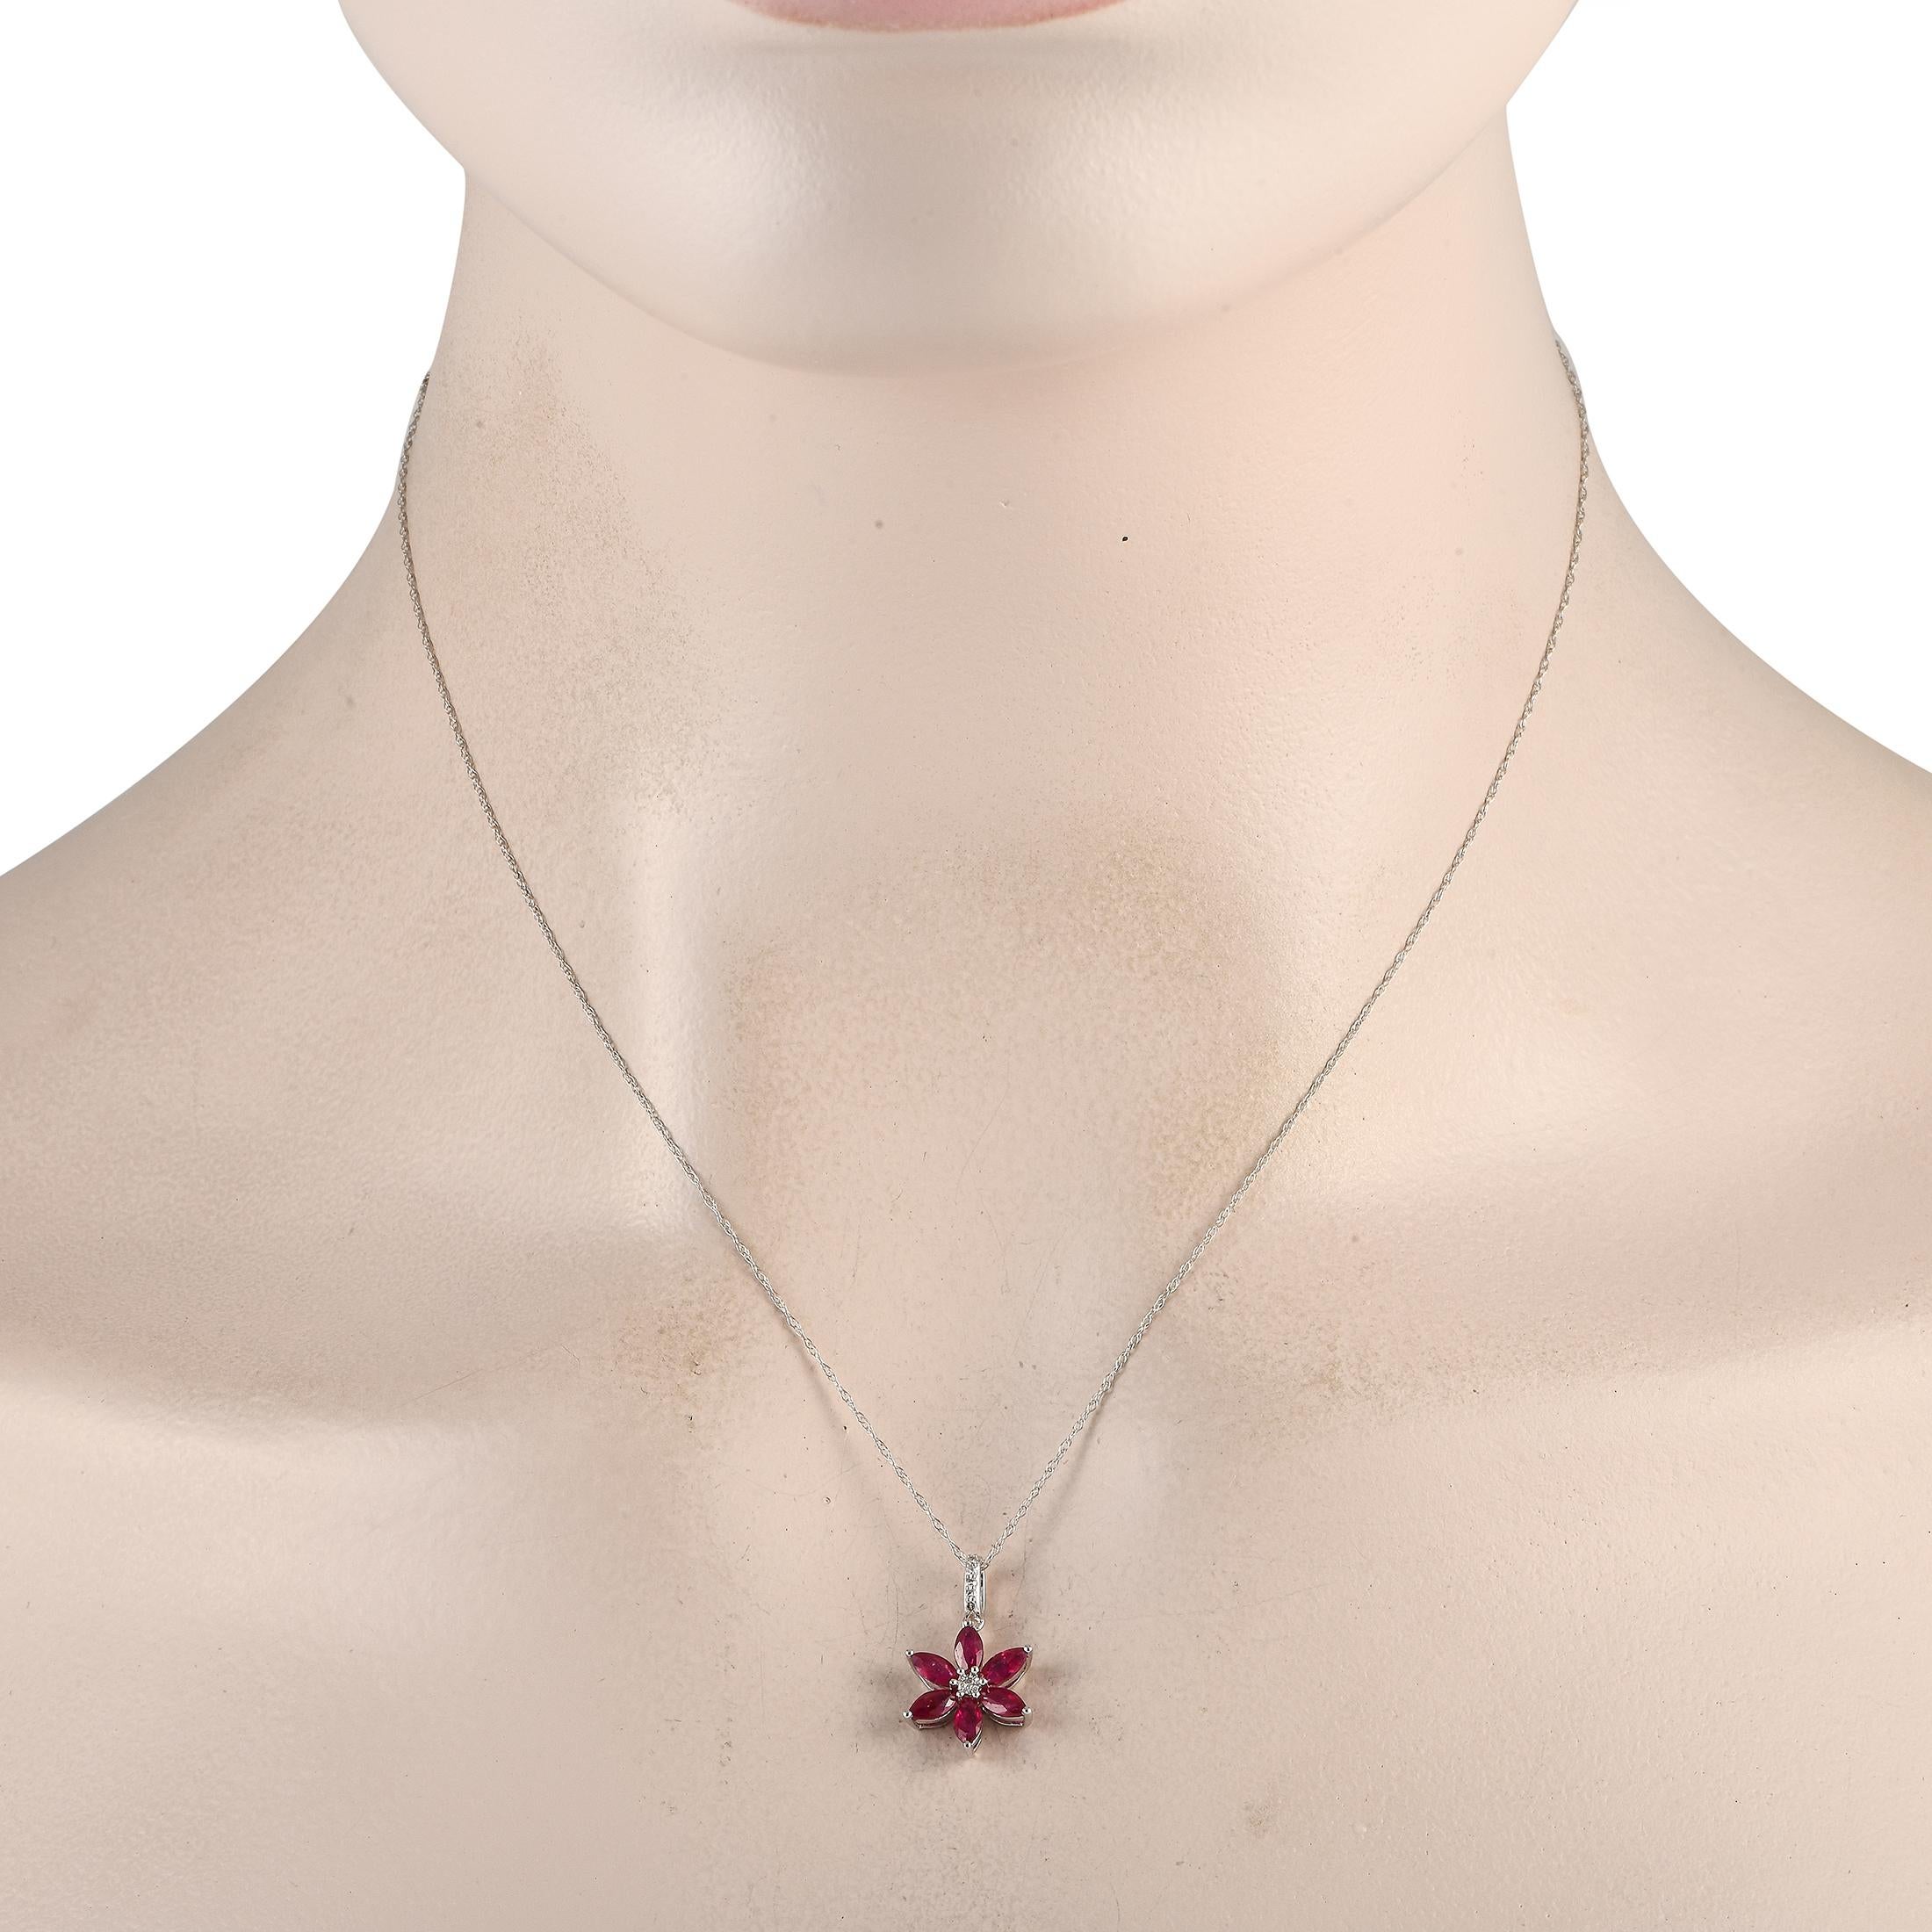 This luxury necklace is equal parts charming and sophisticated. Suspended from an 18 chain, a 14K White Gold floral pendant measures 0.75 long by 0.50 wide. Its elevated by radiant Ruby petals and additional Diamond accents with a total weight of